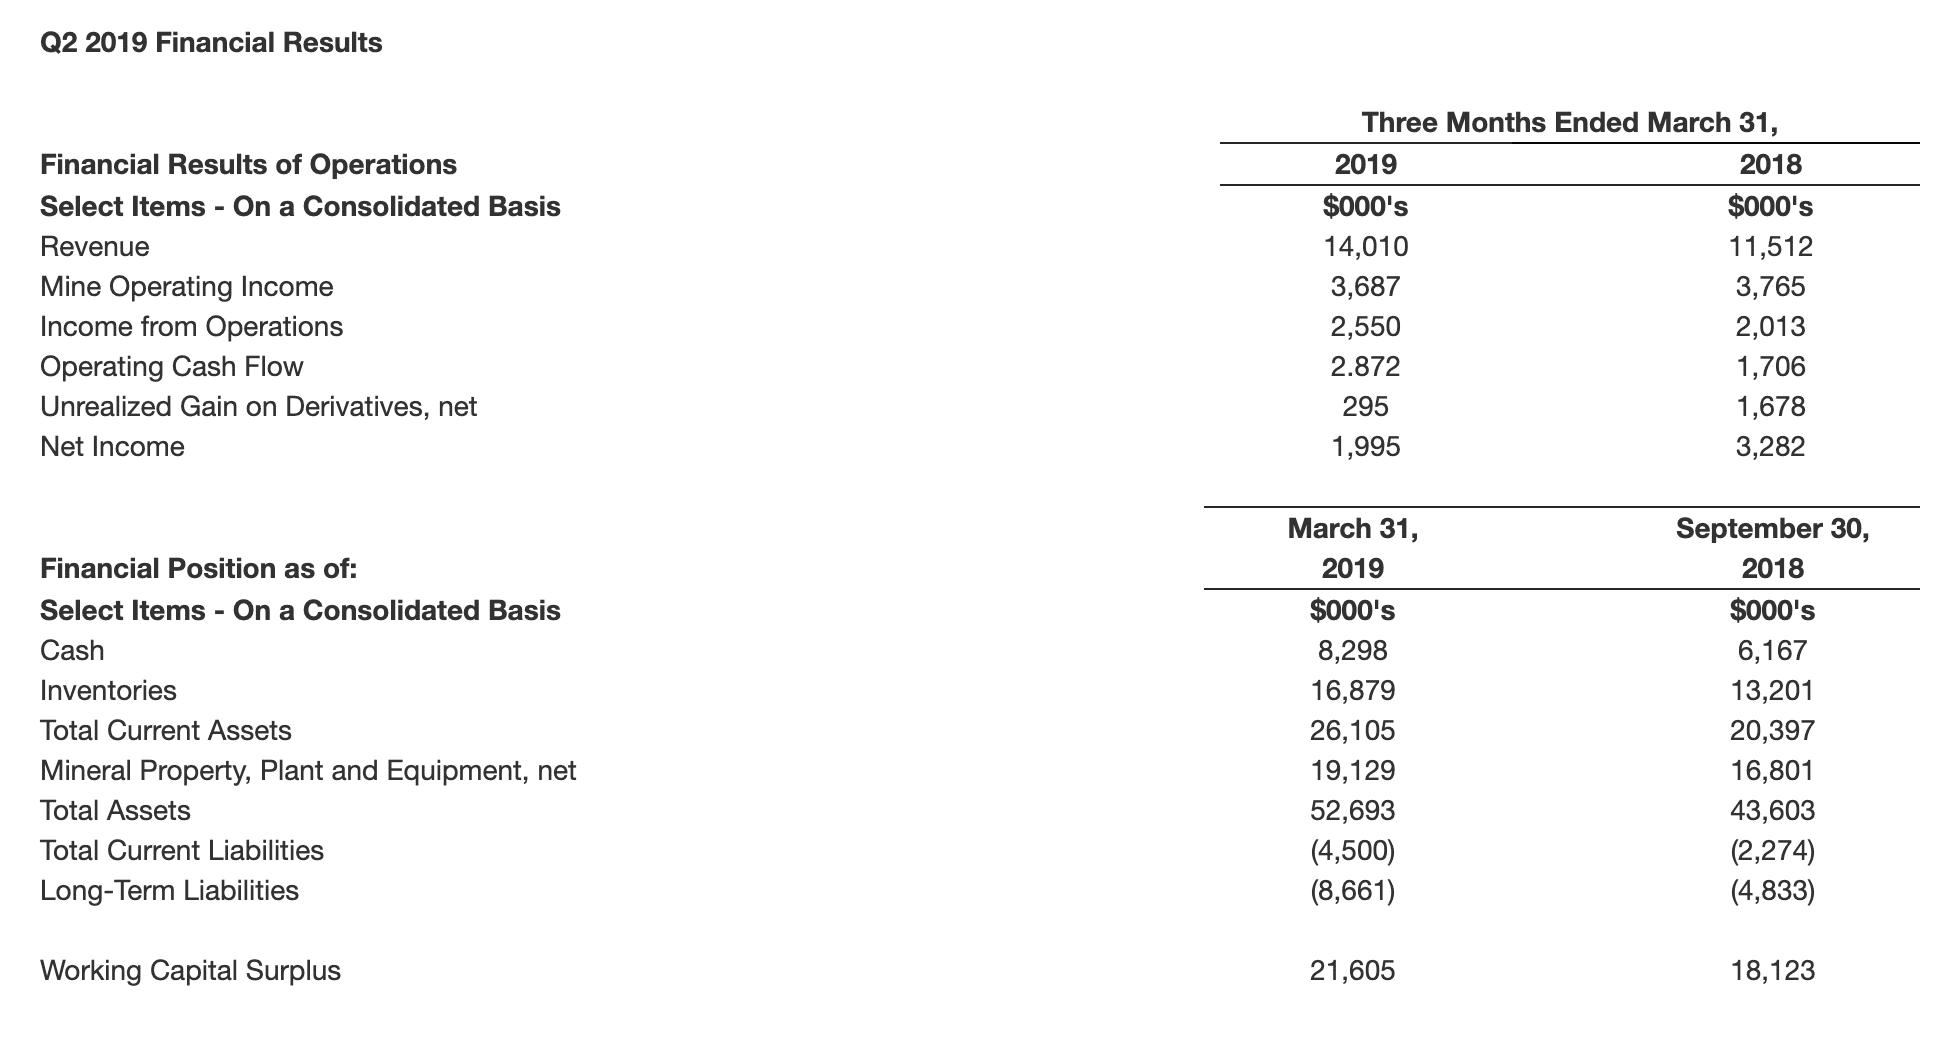 Fiore Gold Q2 2019 financial results